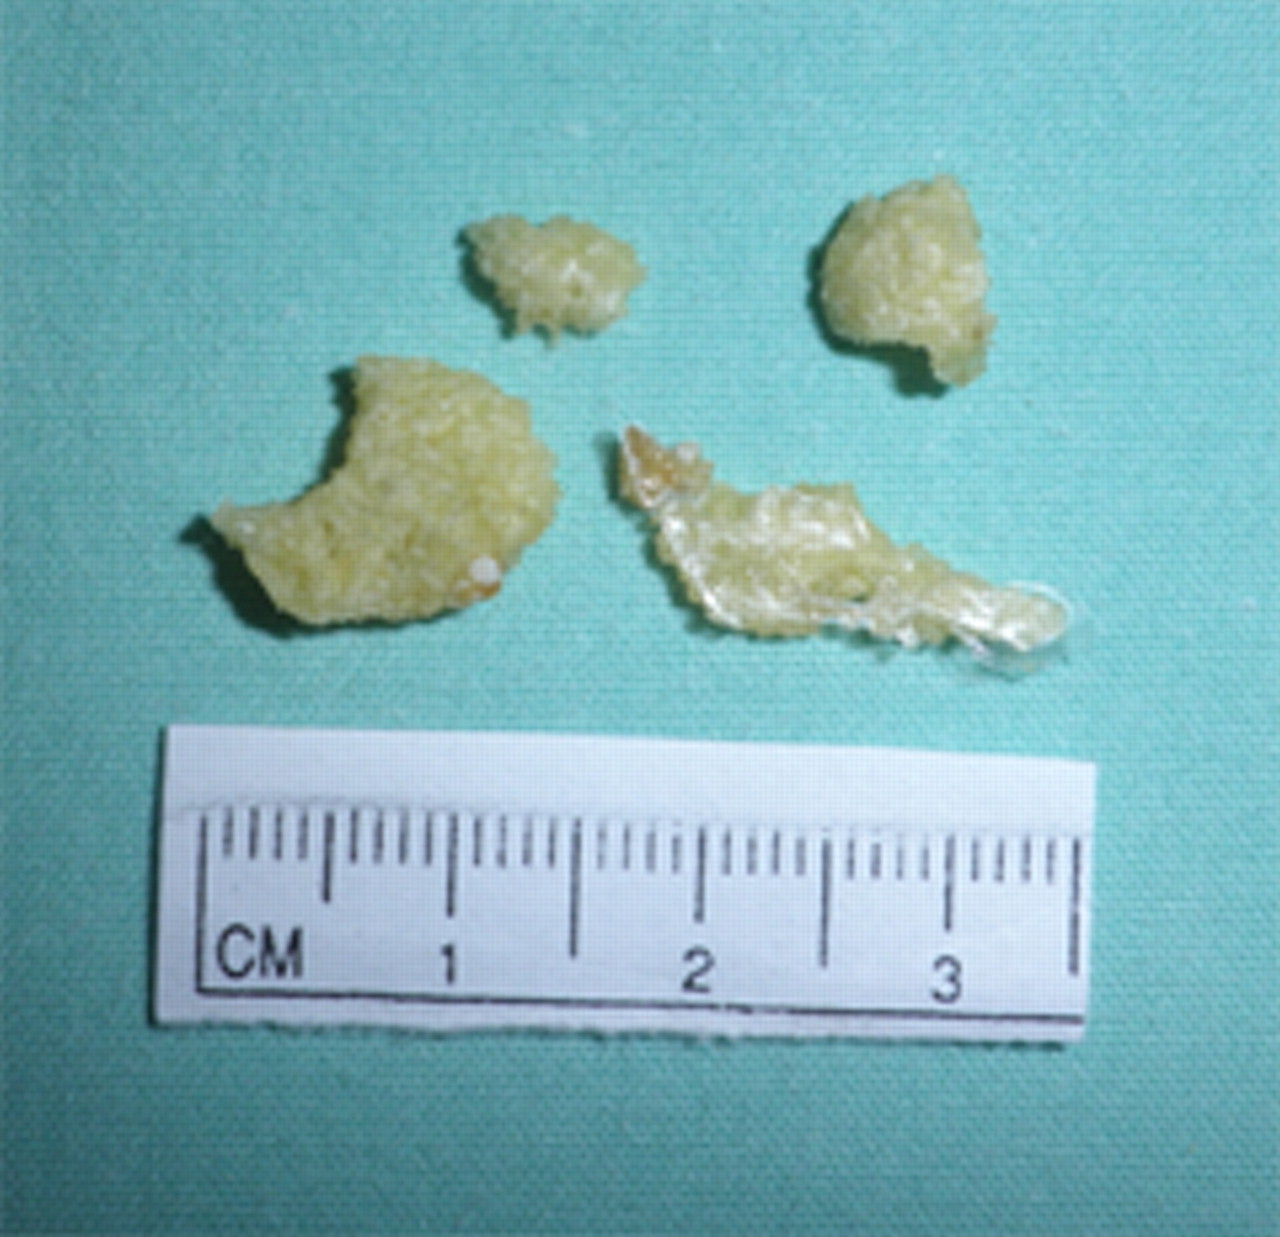 Fig. 8 
          Photograph showing the macroscopic appearance
of the samples of generated tissue: solid pieces with maximum diameter
of 20 mm.
        